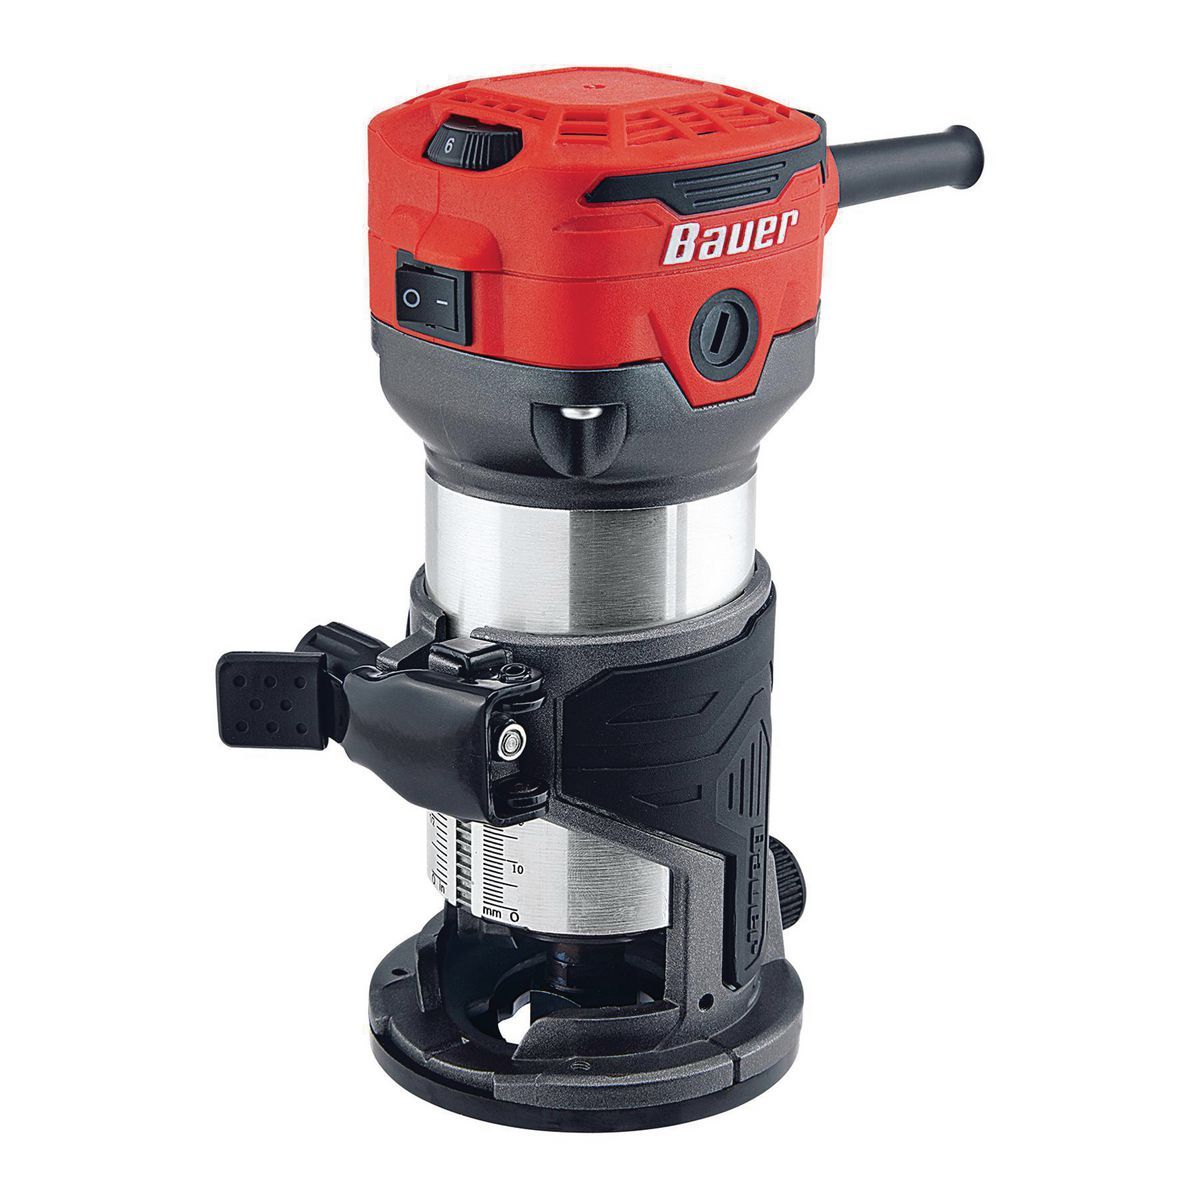 BAUER 1-1/4 HP (Max), 1/4 in. Variable Speed Compact Router